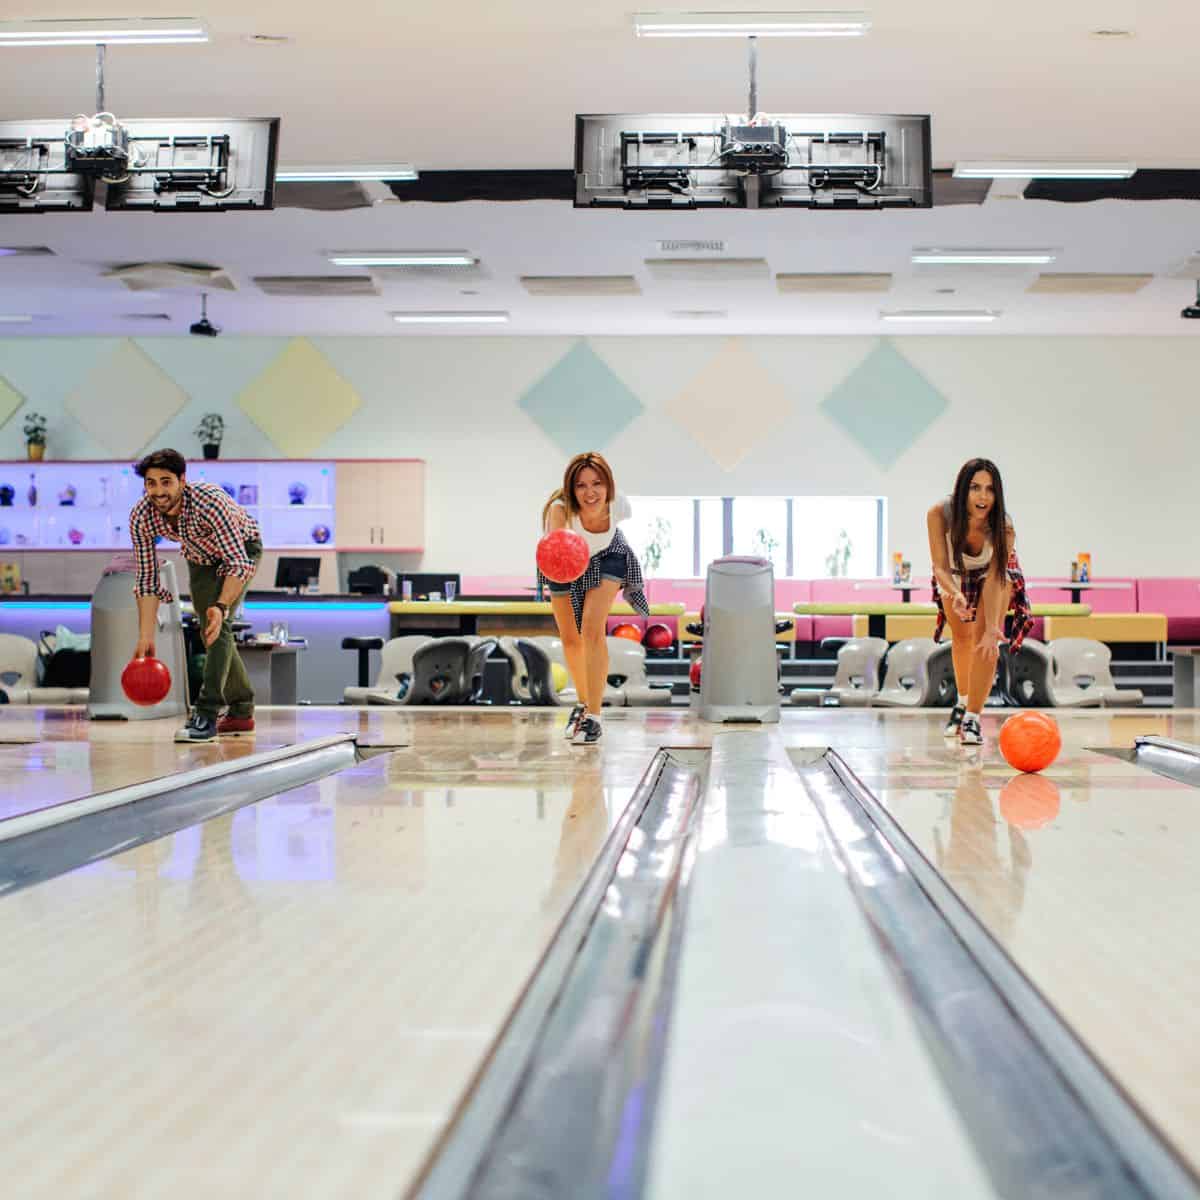 3 friends bowling at a bowling alley